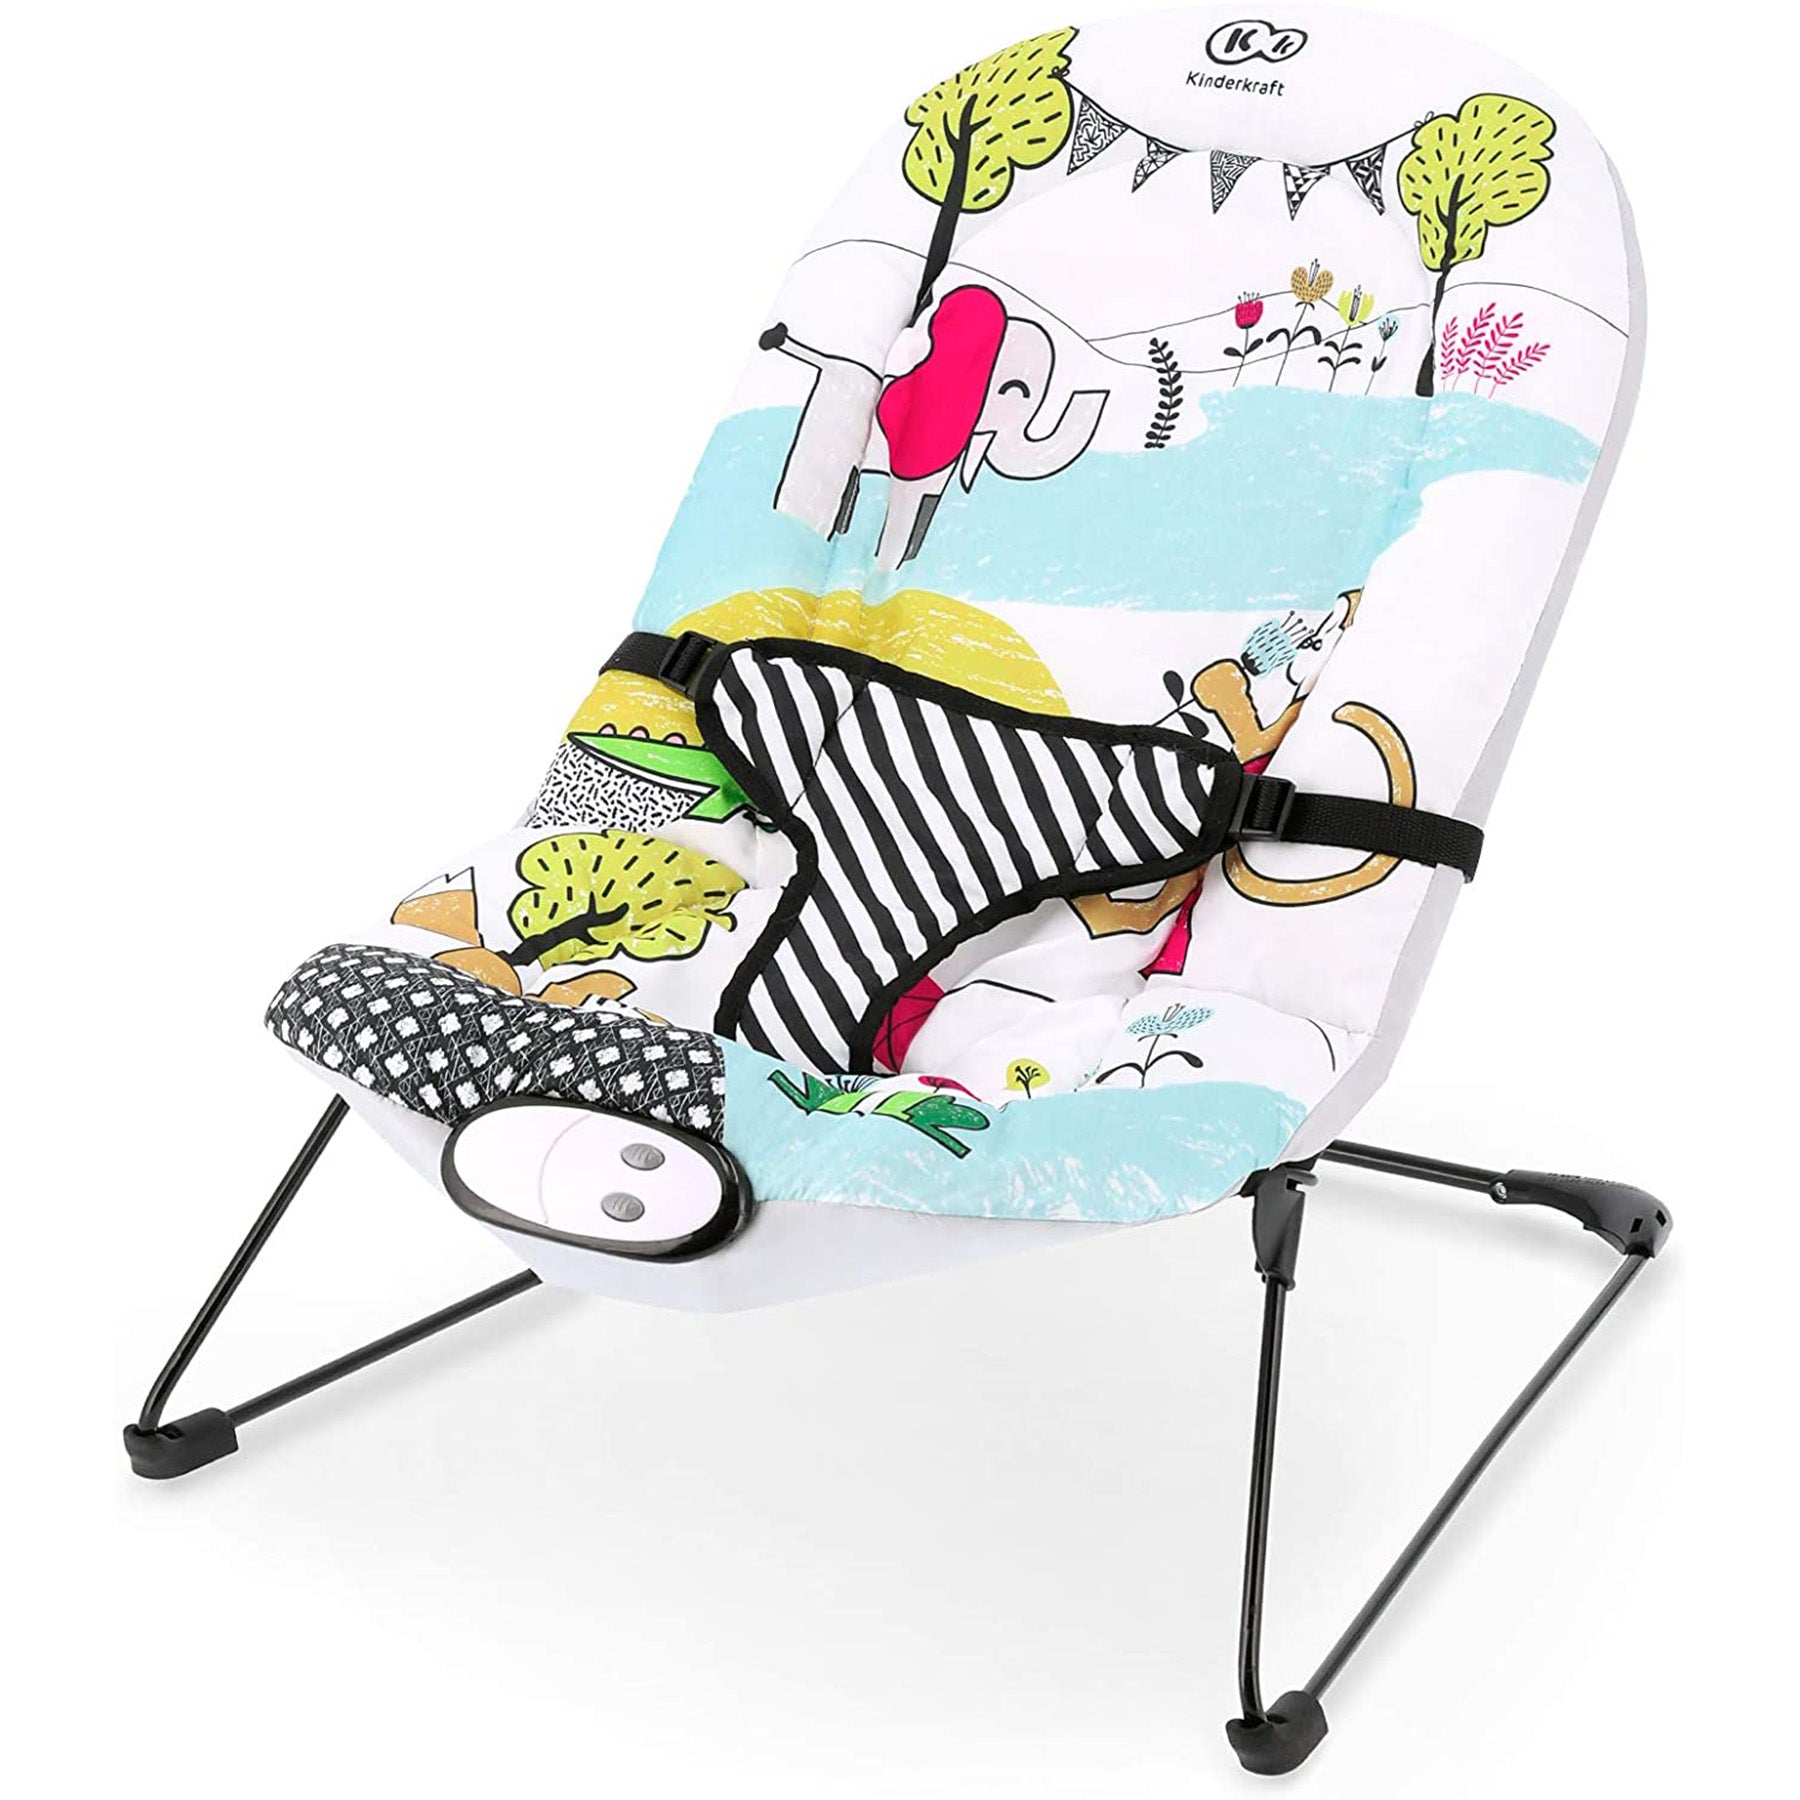 Reclined Bouncer Chair for kids